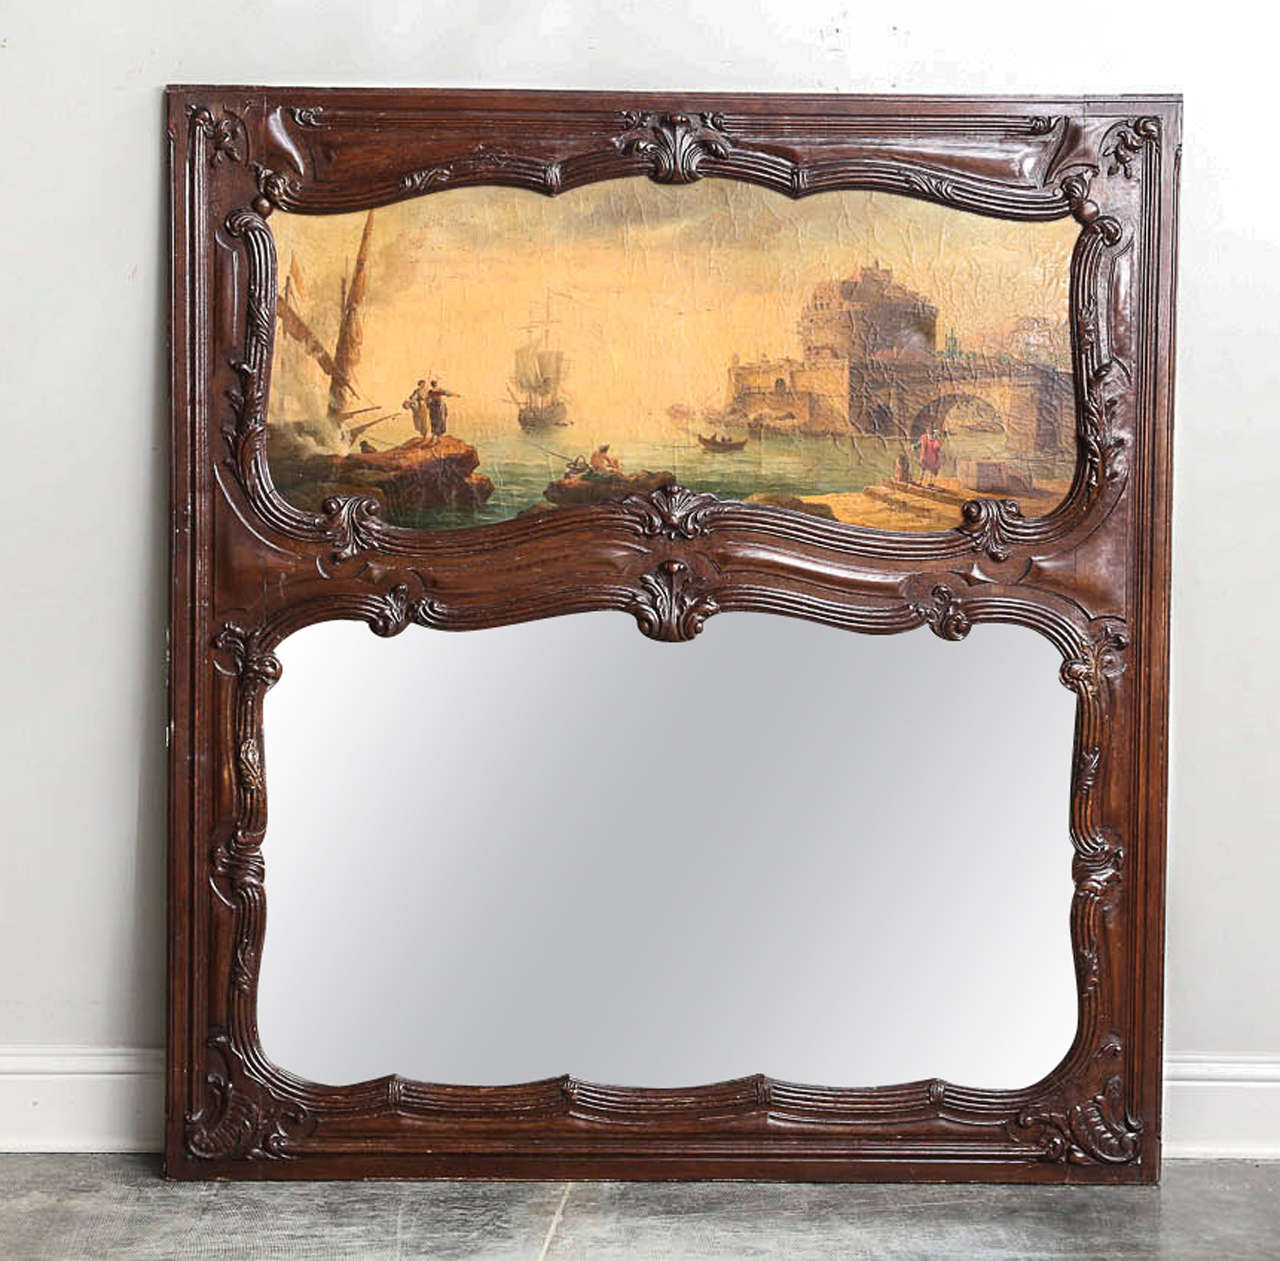 Remarkable 19th century overmantel trumeau with carved wood frame and old mirror. Original oil panting depicting 18th century port scene. Exceptional carved detailing on the frame makes for a truly one-of-a-kind piece of art. 

Established in